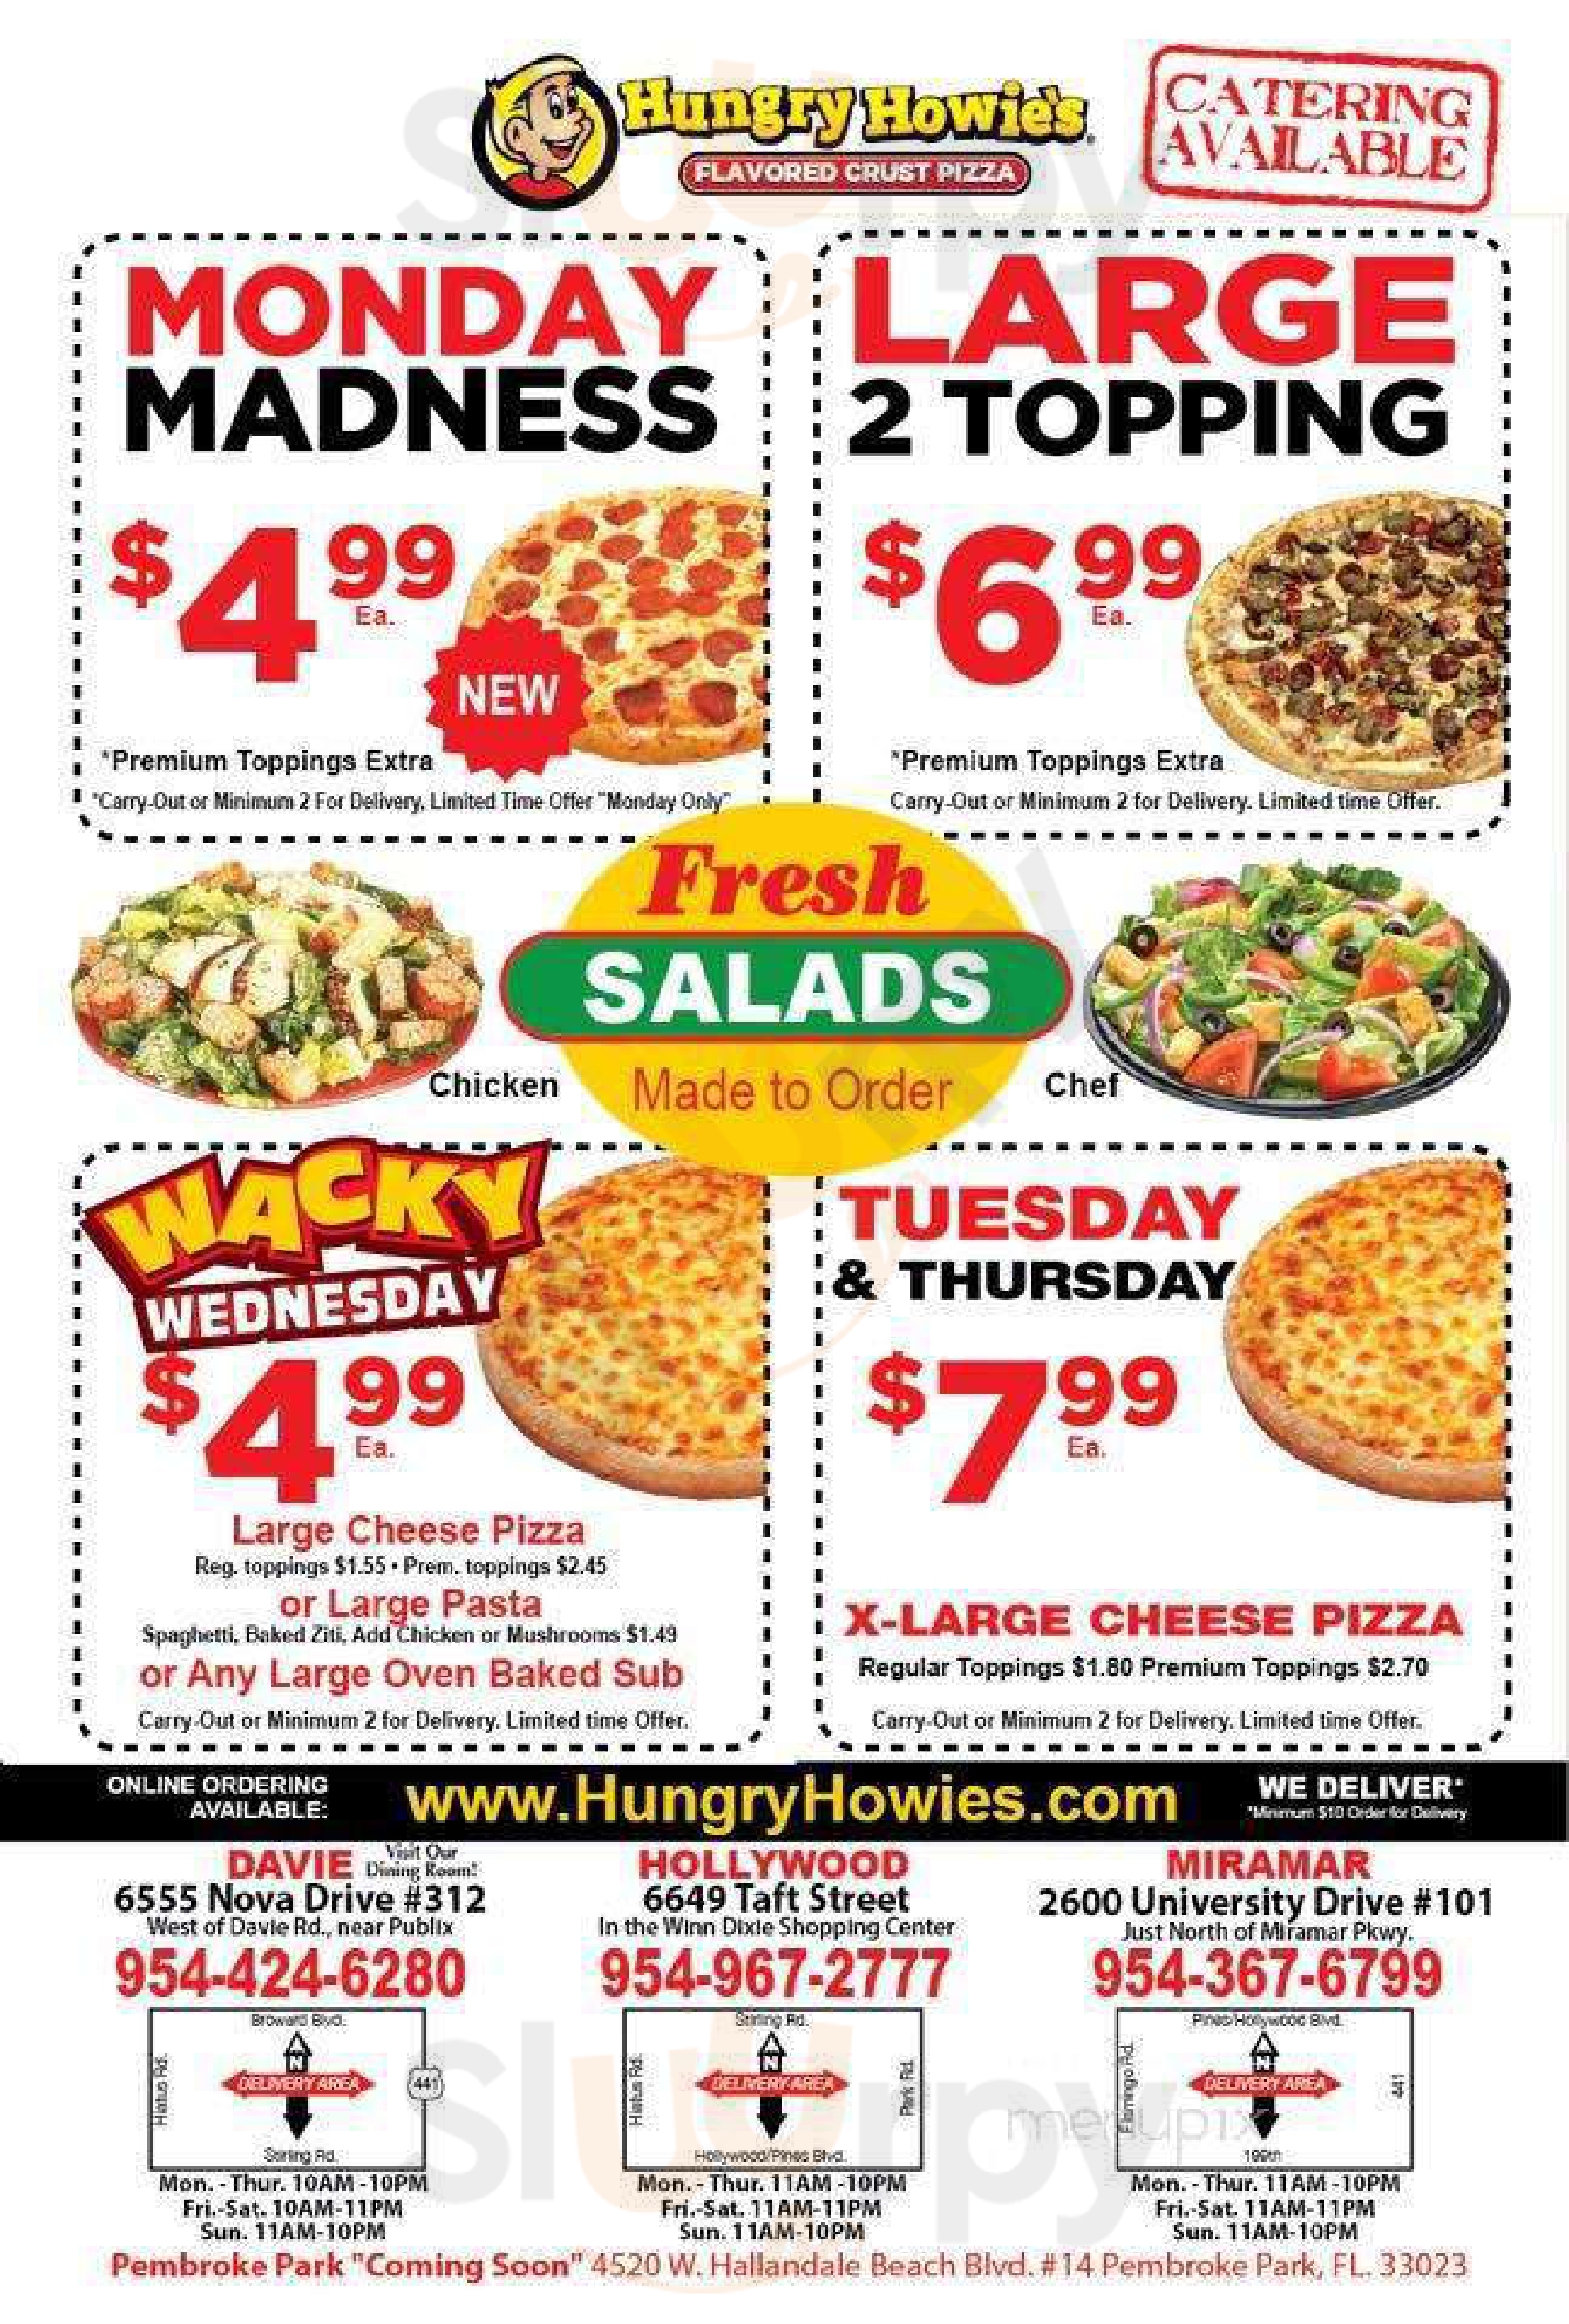 Hungry Howie's Pizza Grand Rapids Menu - 1